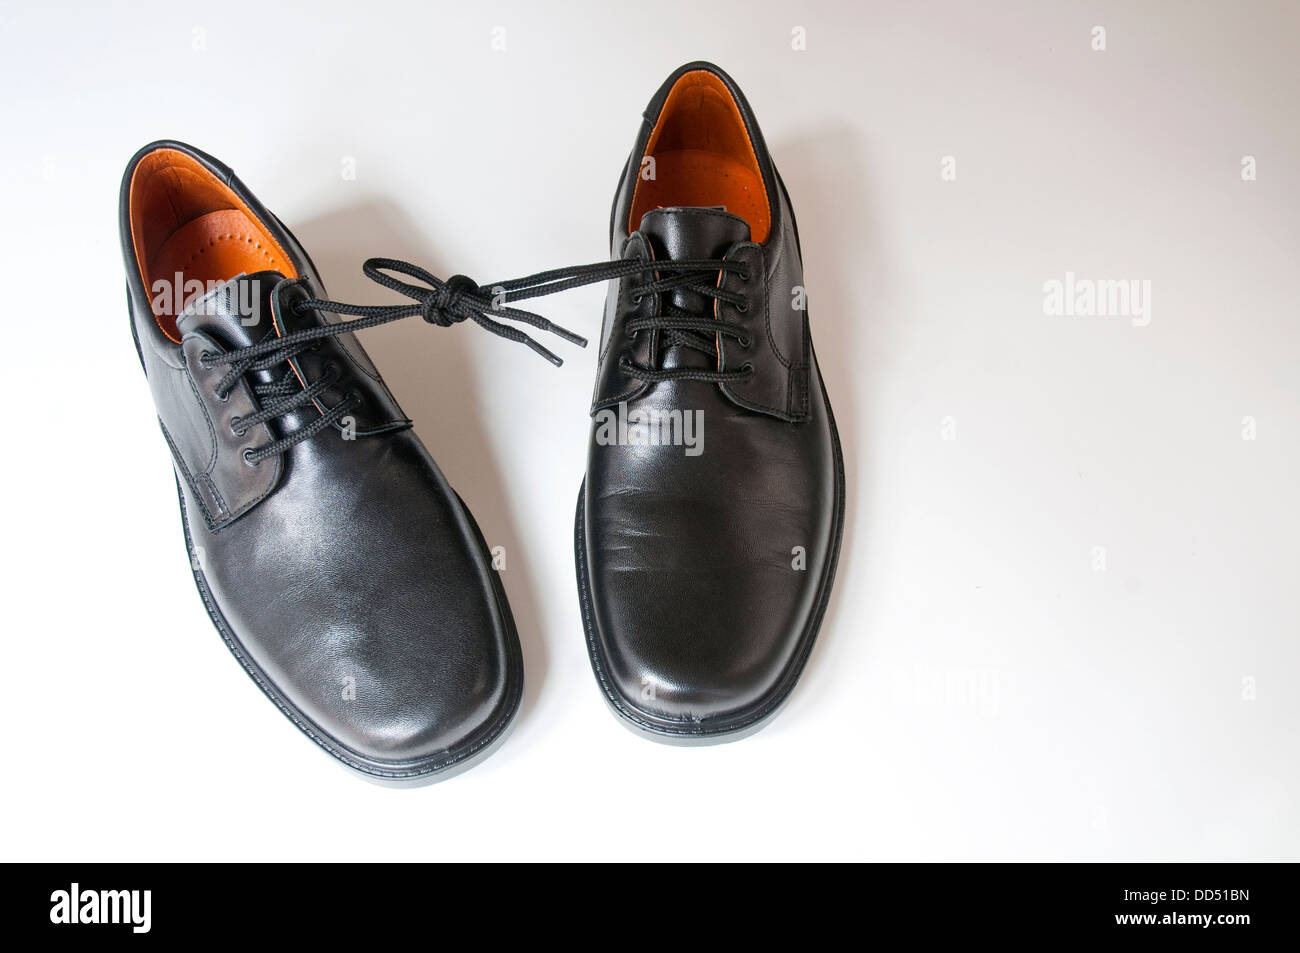 Pair of shoes with their laces tied each other. Stock Photo